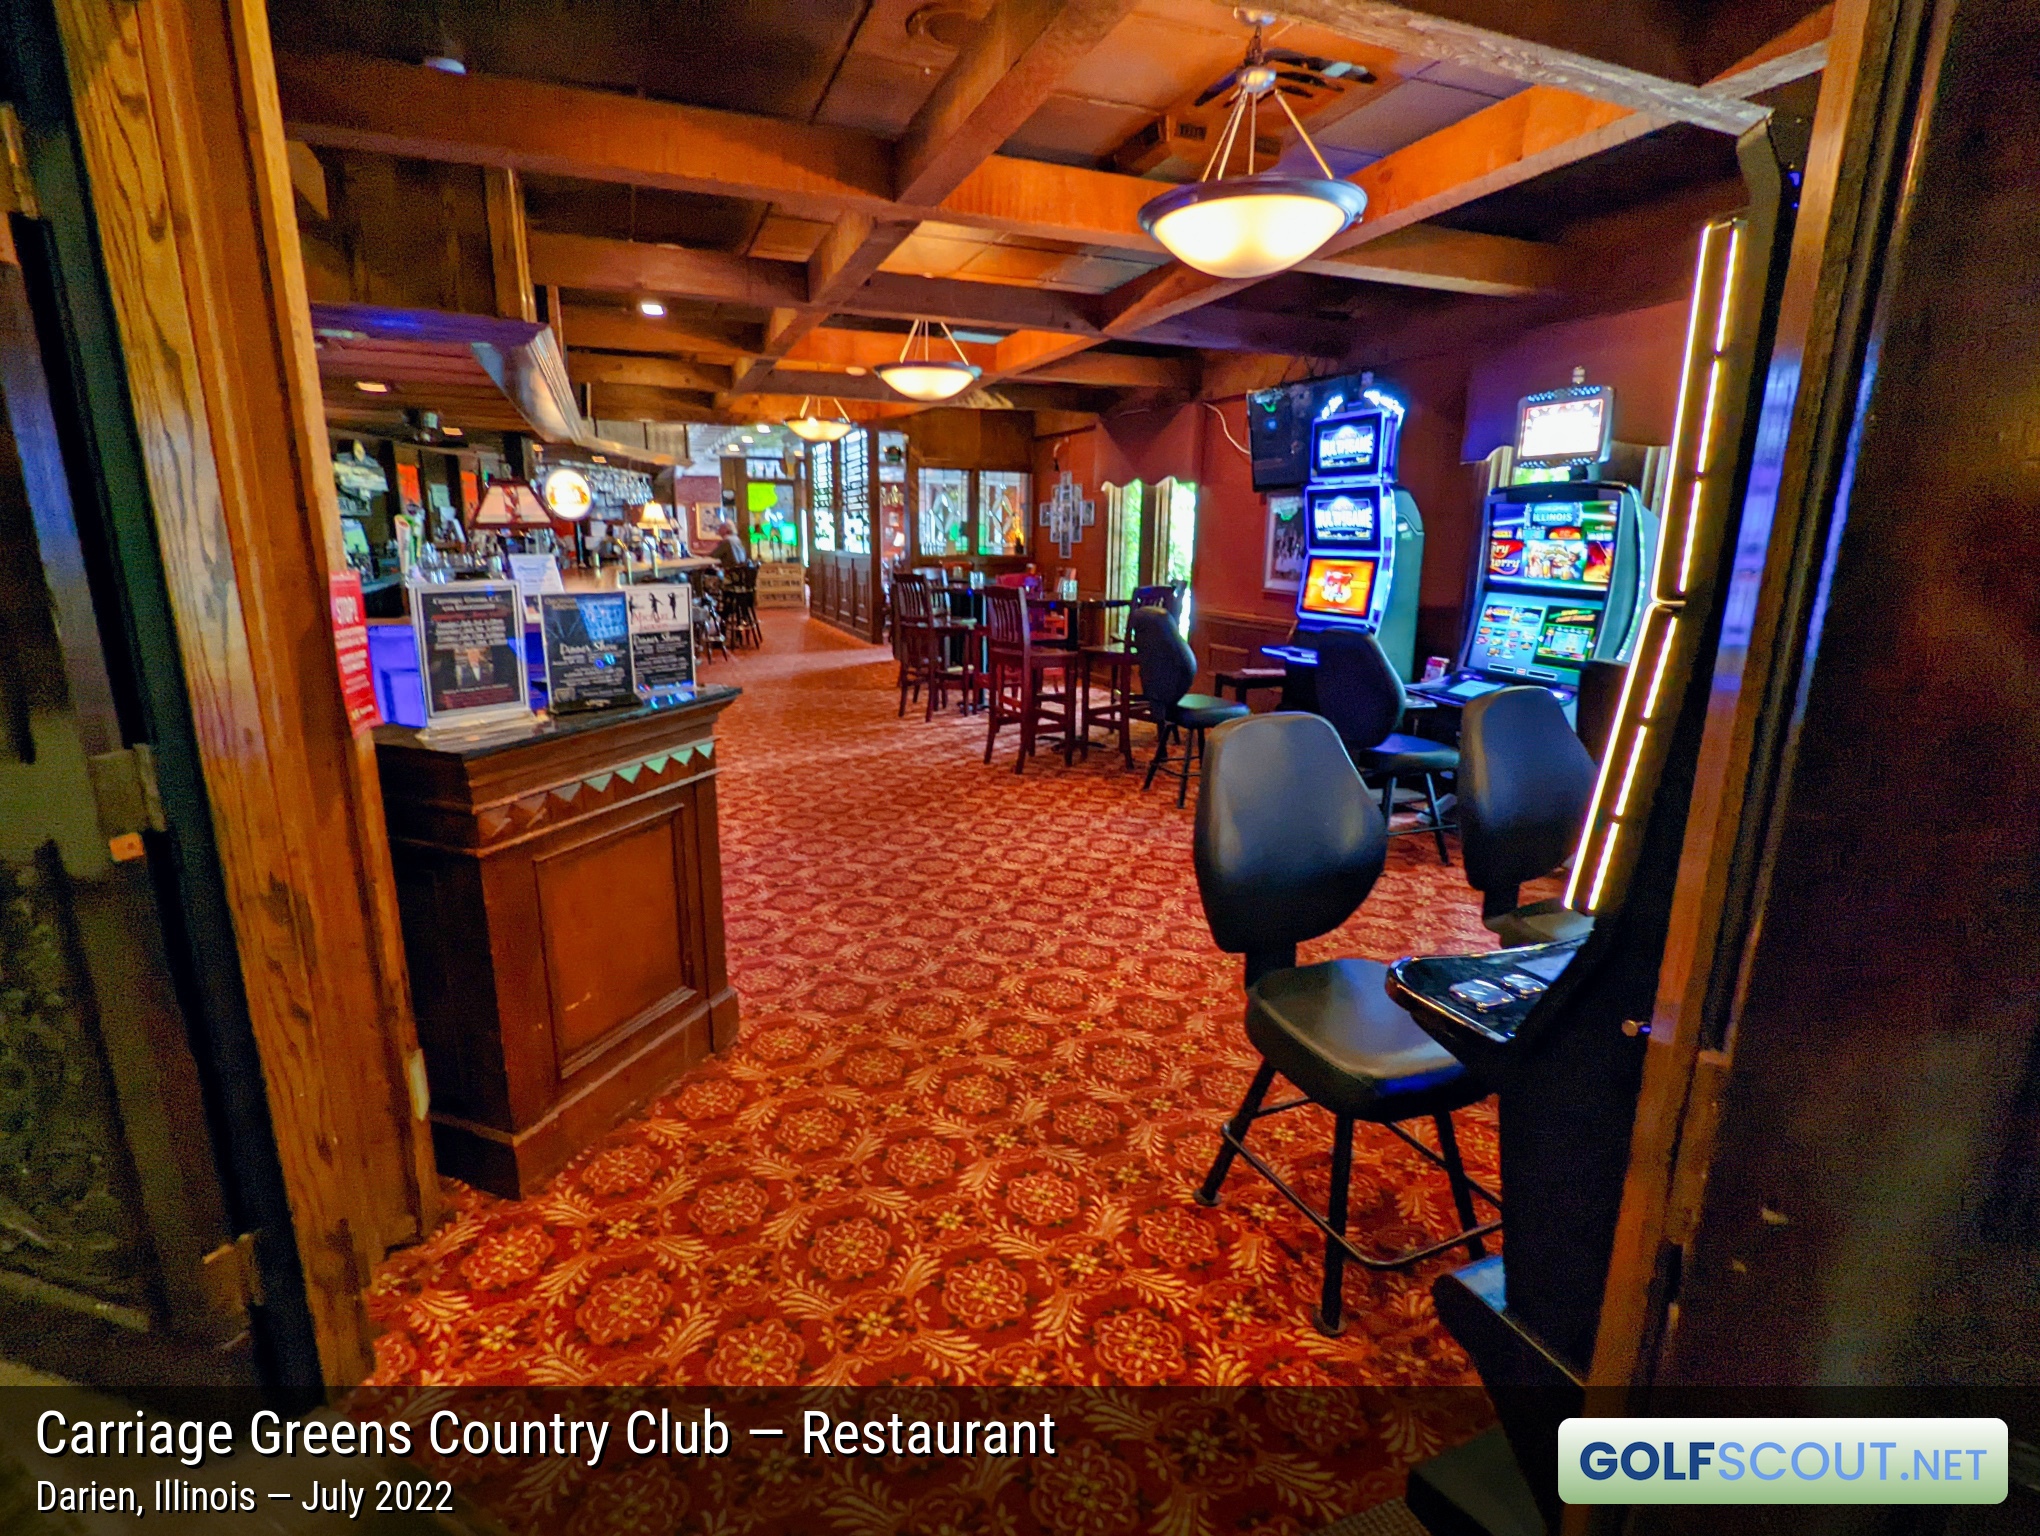 Photo of the restaurant at Carriage Greens Country Club in Darien, Illinois. The restaurant here is called the Sandtrap Bar & grill. The kitchen is closed on Mondays.